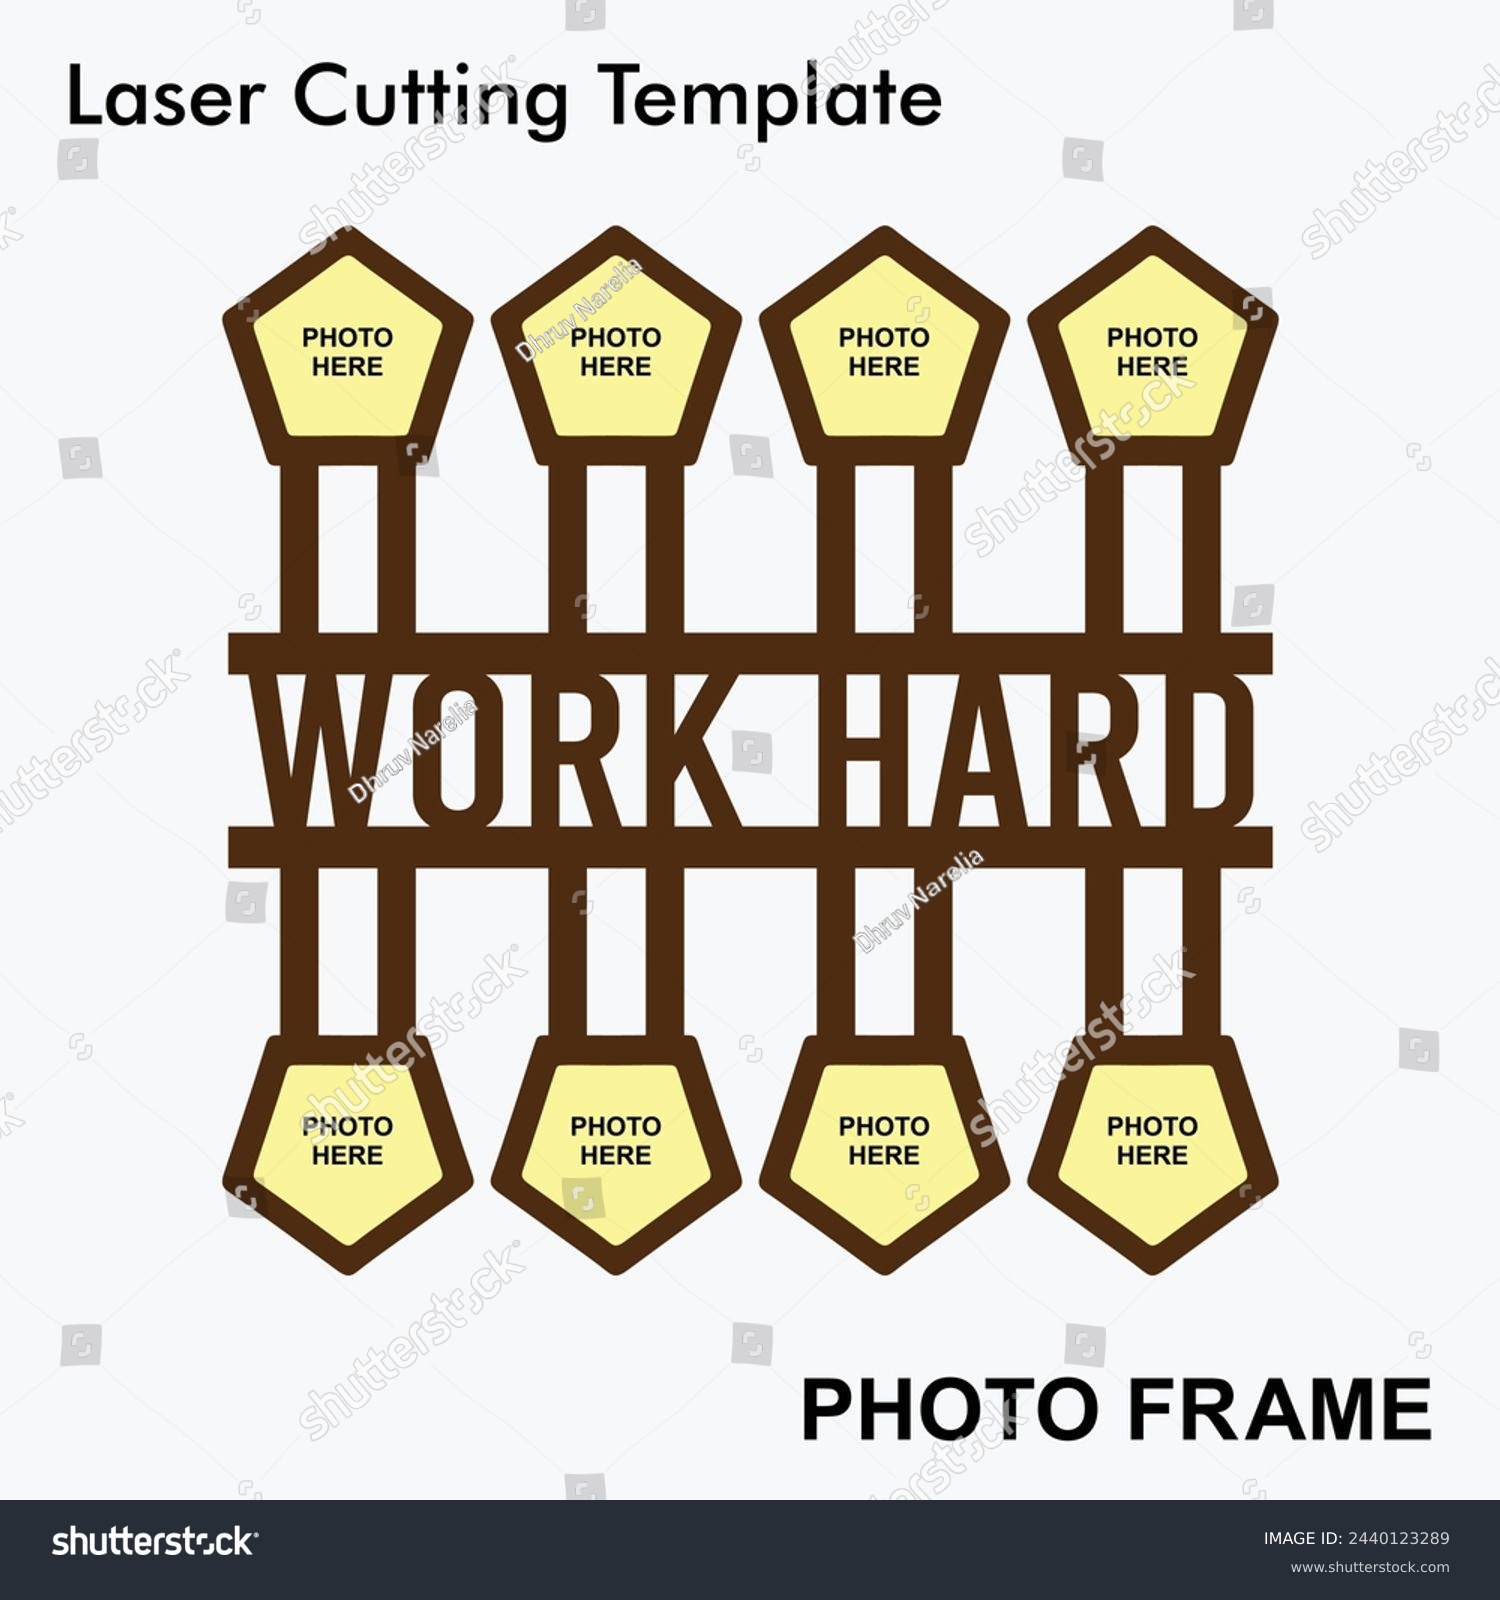 SVG of Work Hard laser cut photo frame with 8 photo. Home decor wooden sublimation frame template. Suitable for home and room decor. Laser cut photo frame template design for mdf and acrylic cutting. svg